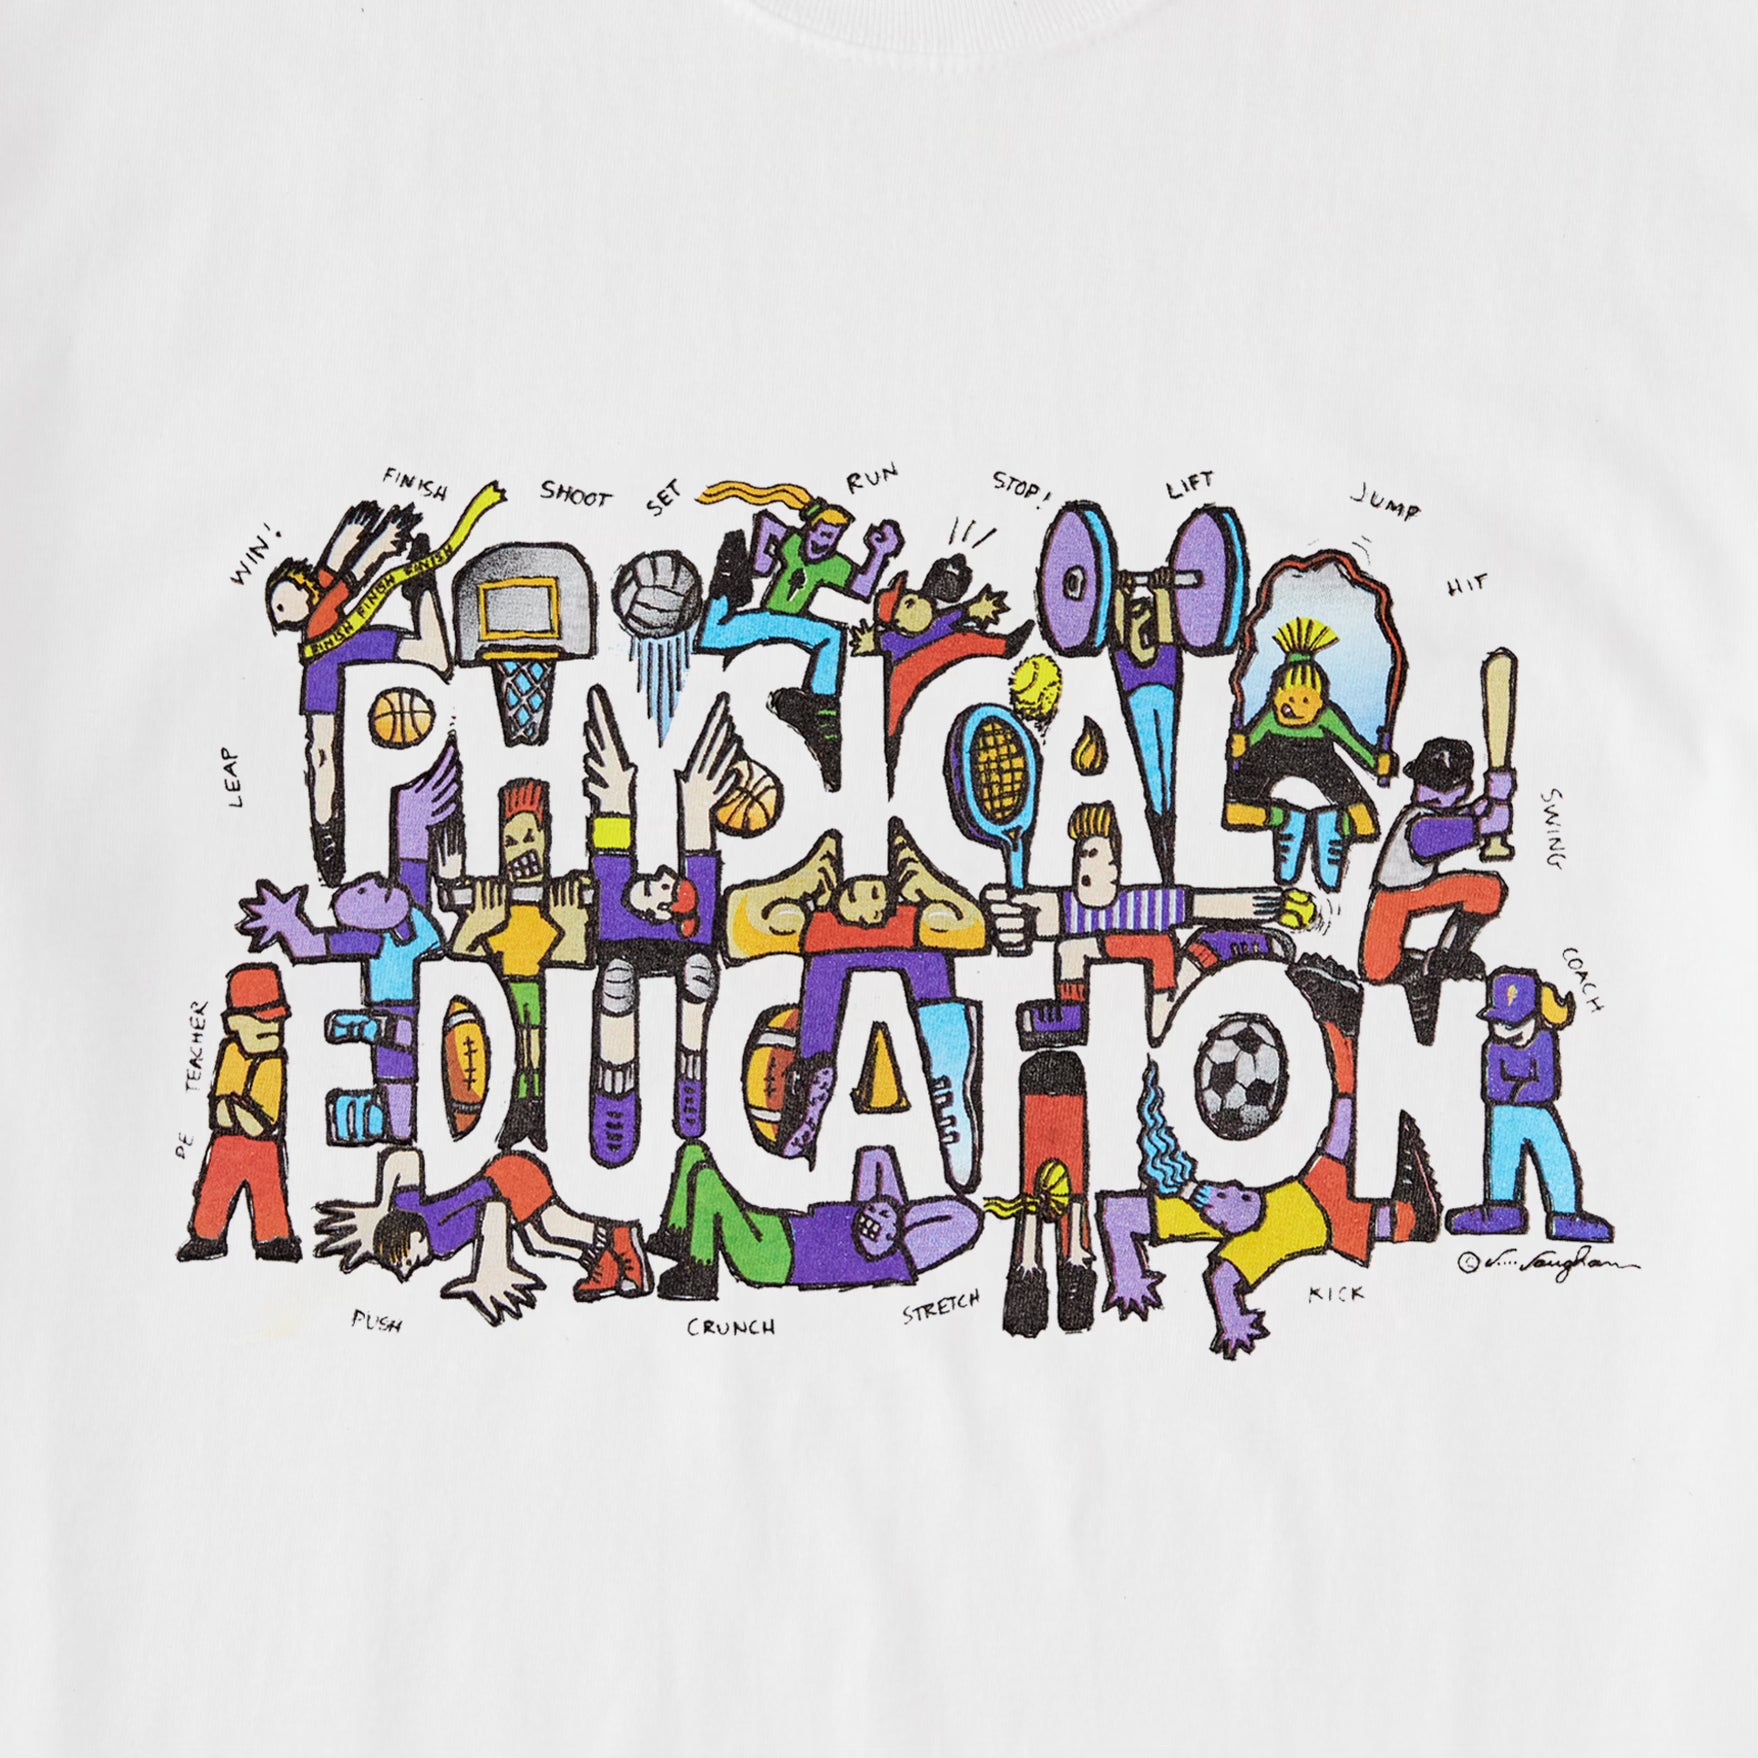 Physical Education Tee - White